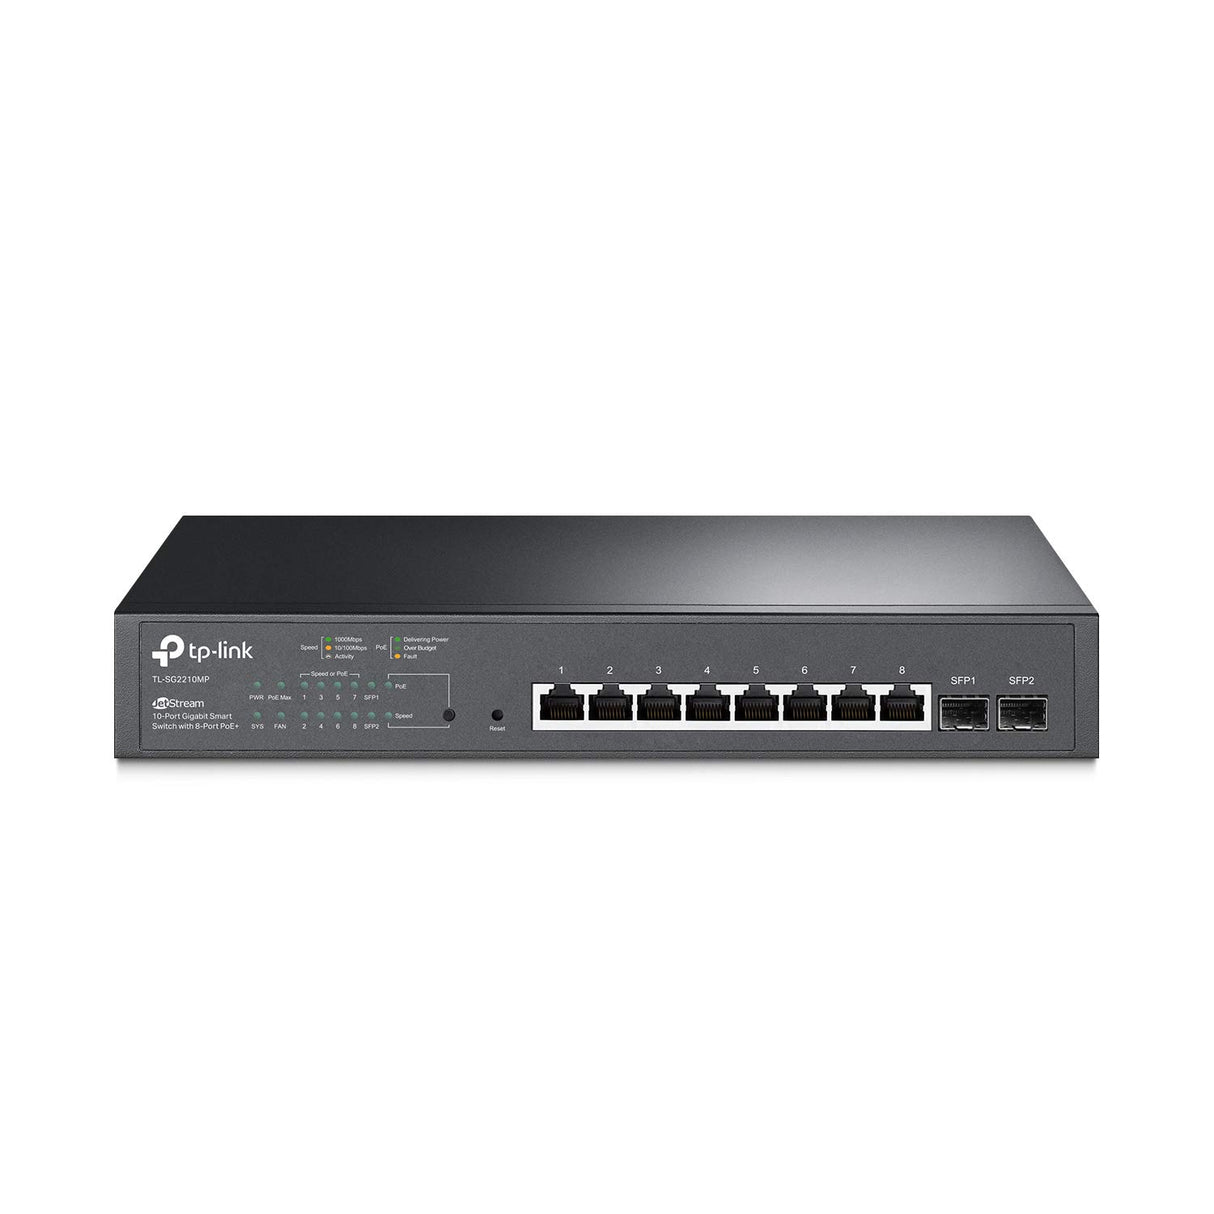 TP-Link TL-SG2210MP | Jetstream 10 Port Gigabit Smart Managed PoE switch | 8 PoE+ Ports @ 150W, 2 SFP Slots | Omada SDN Integrated | PoE Recovery | IPv6 | Static Routing | Limited Lifetime Protection 8 Port PoE+, 2 SFP Slots SDN Managed